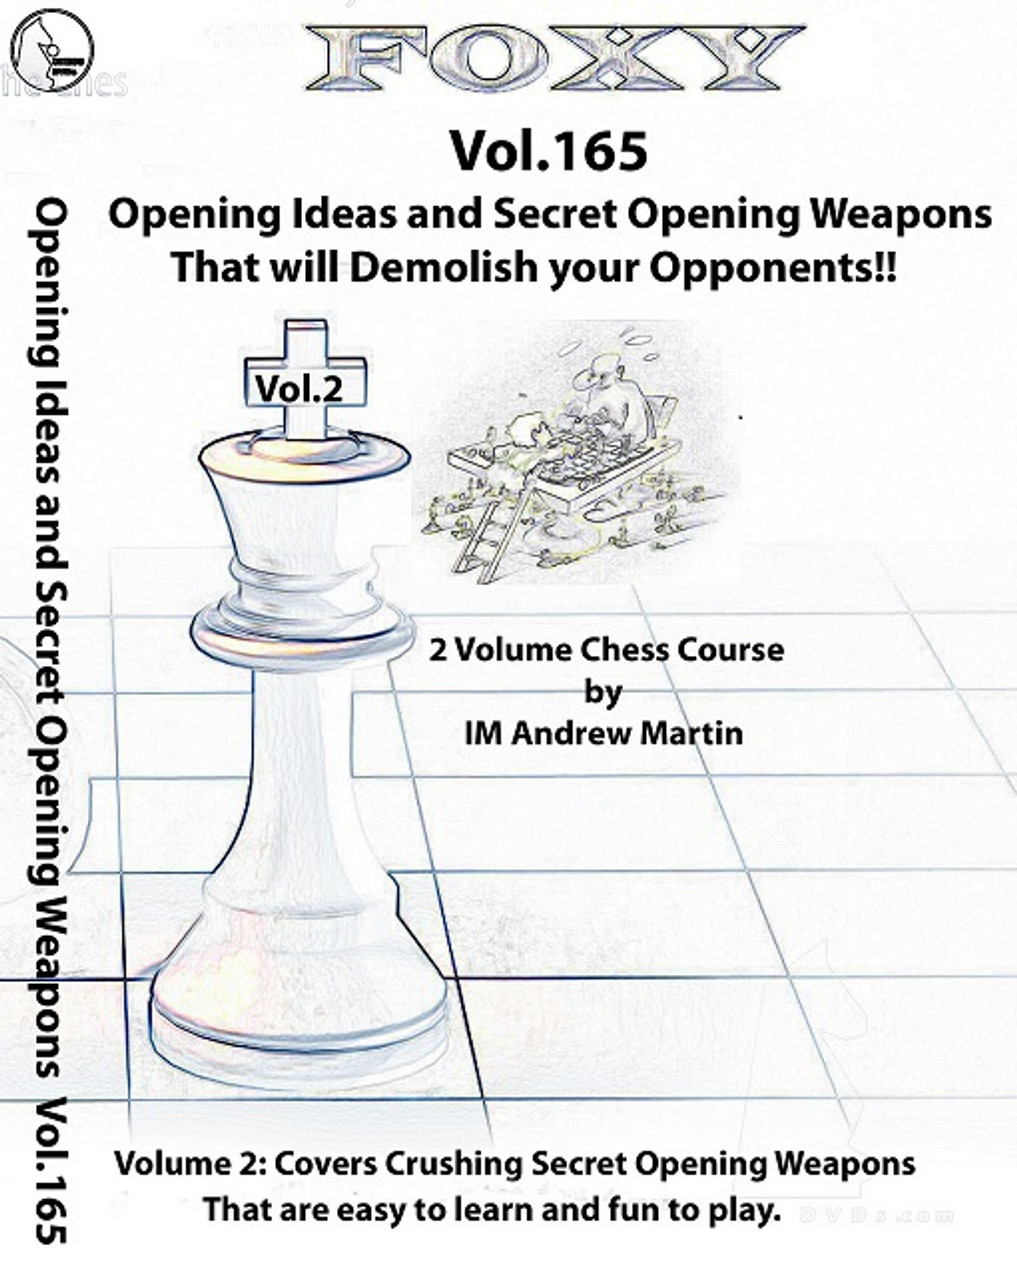 Foxy Chess Openings, Vol. 164 & 165: Opening Ideas and Techniques &Opening Ideas and Secret Weapons 